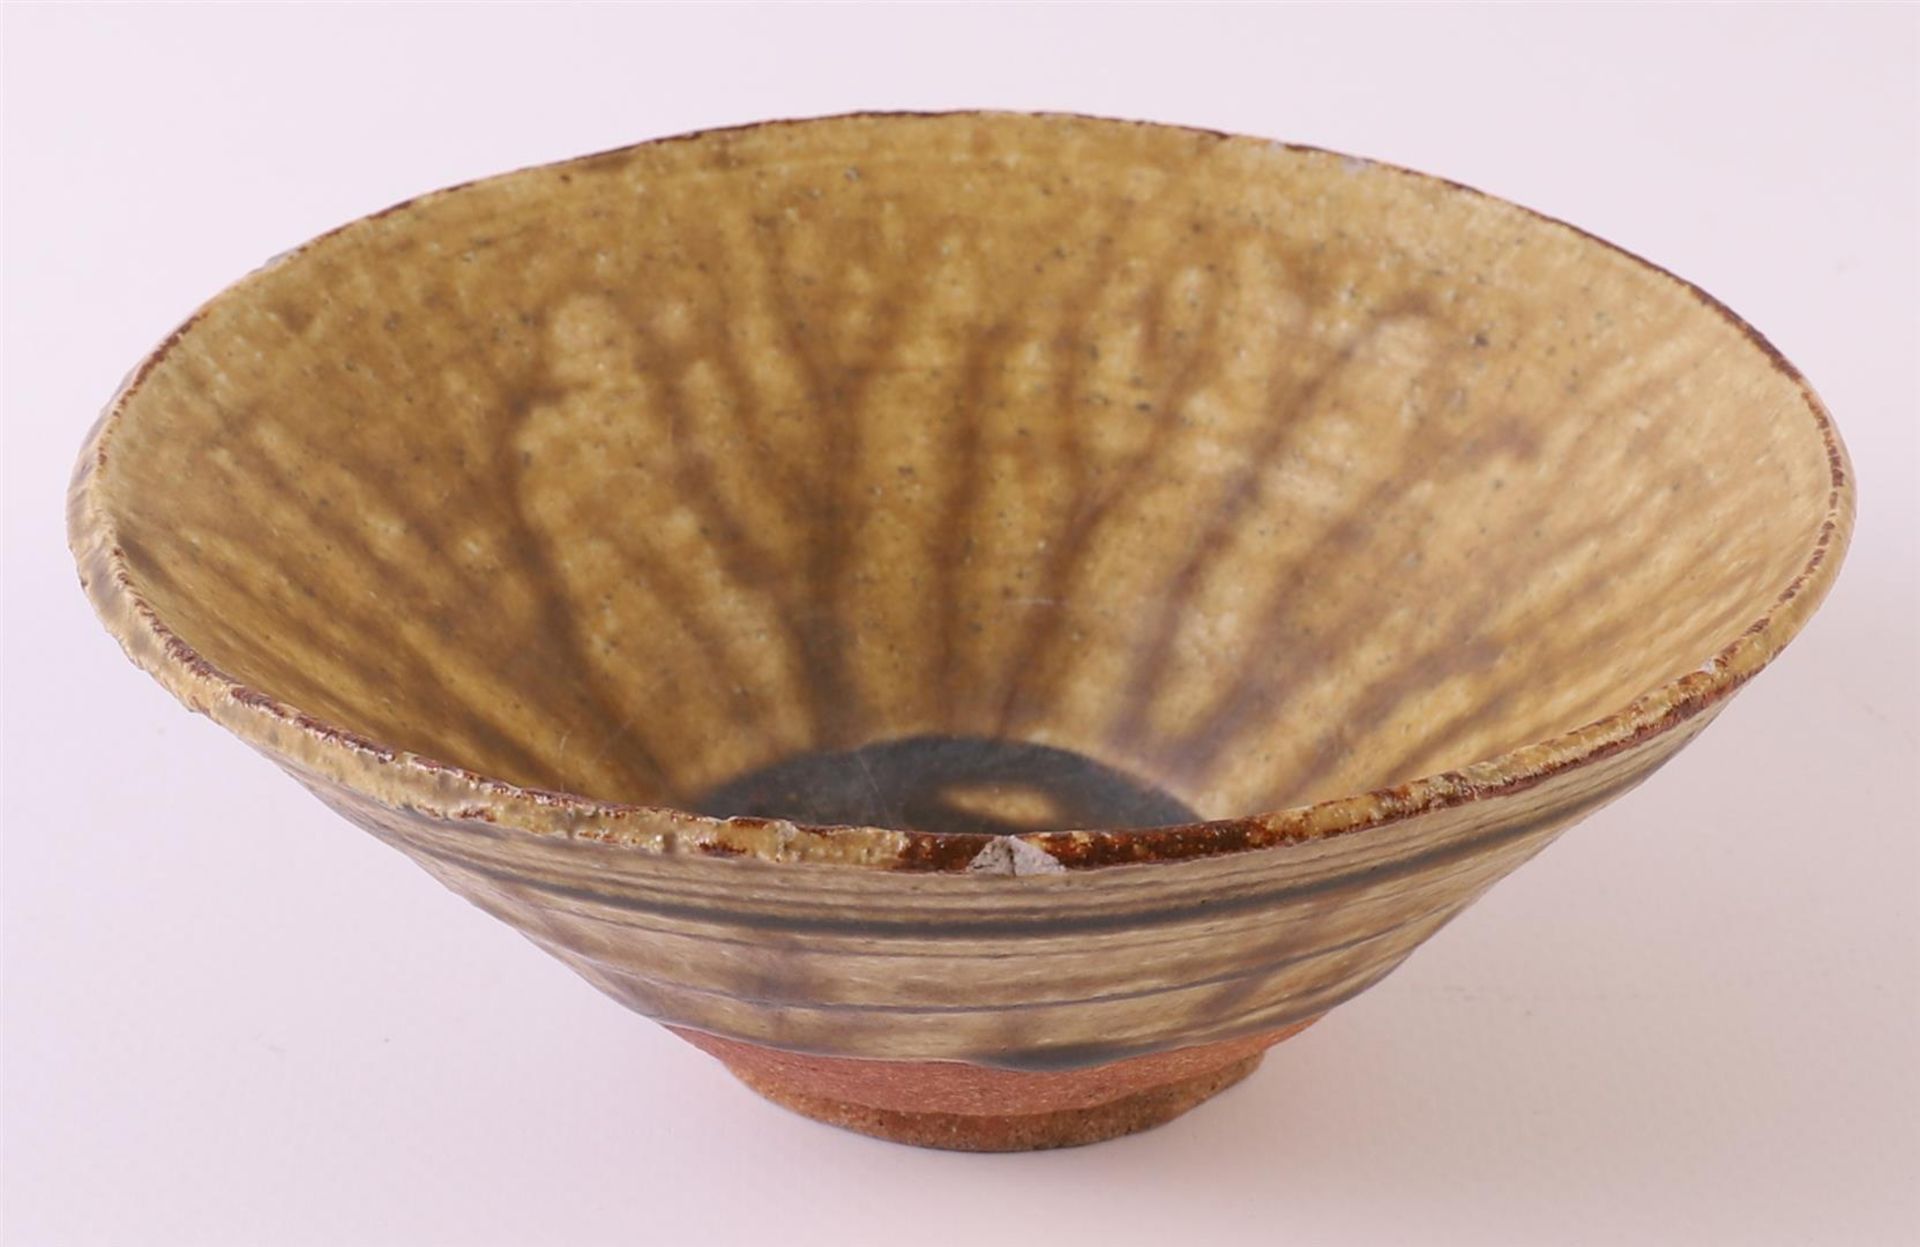 A brown glazed earthenware conical Temmoku bowl, China, Song dynasty 12th century, h 5 x Ø 13.5 - Image 8 of 8